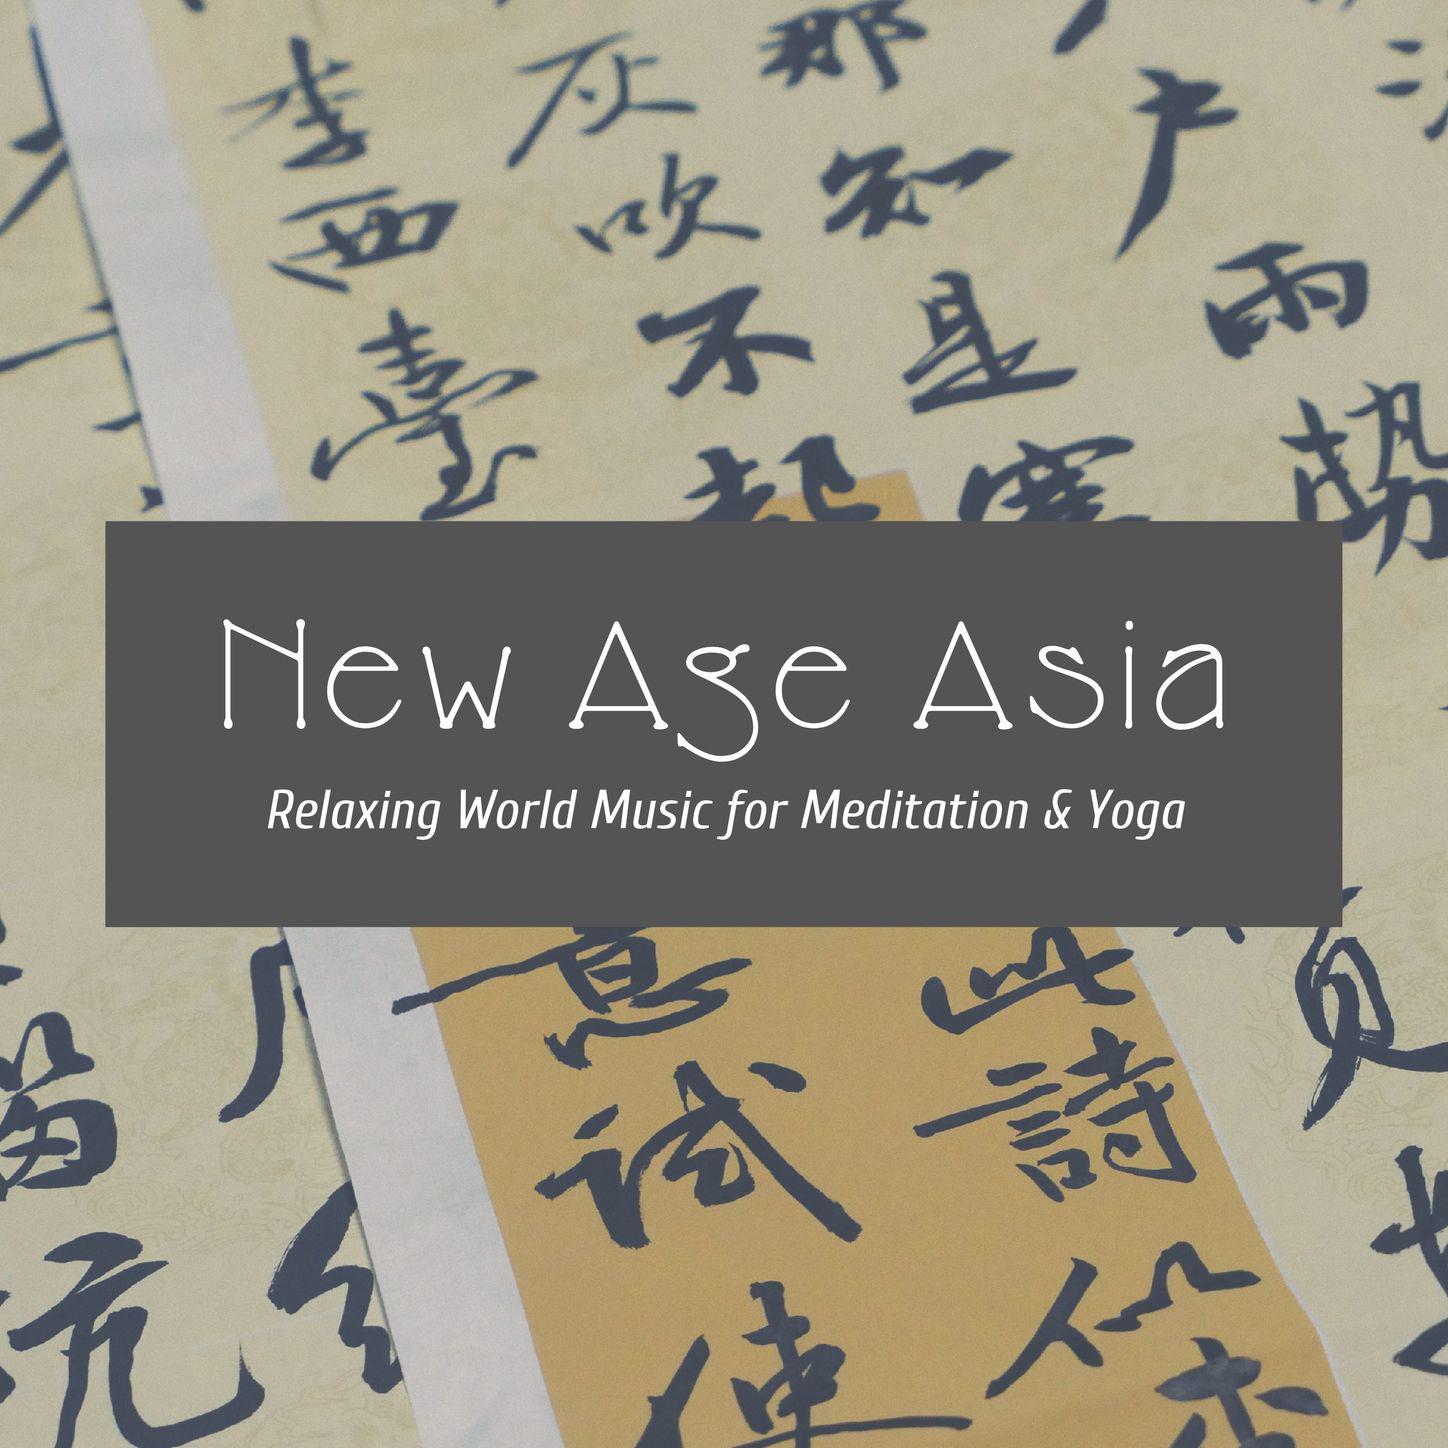 New Age Asia